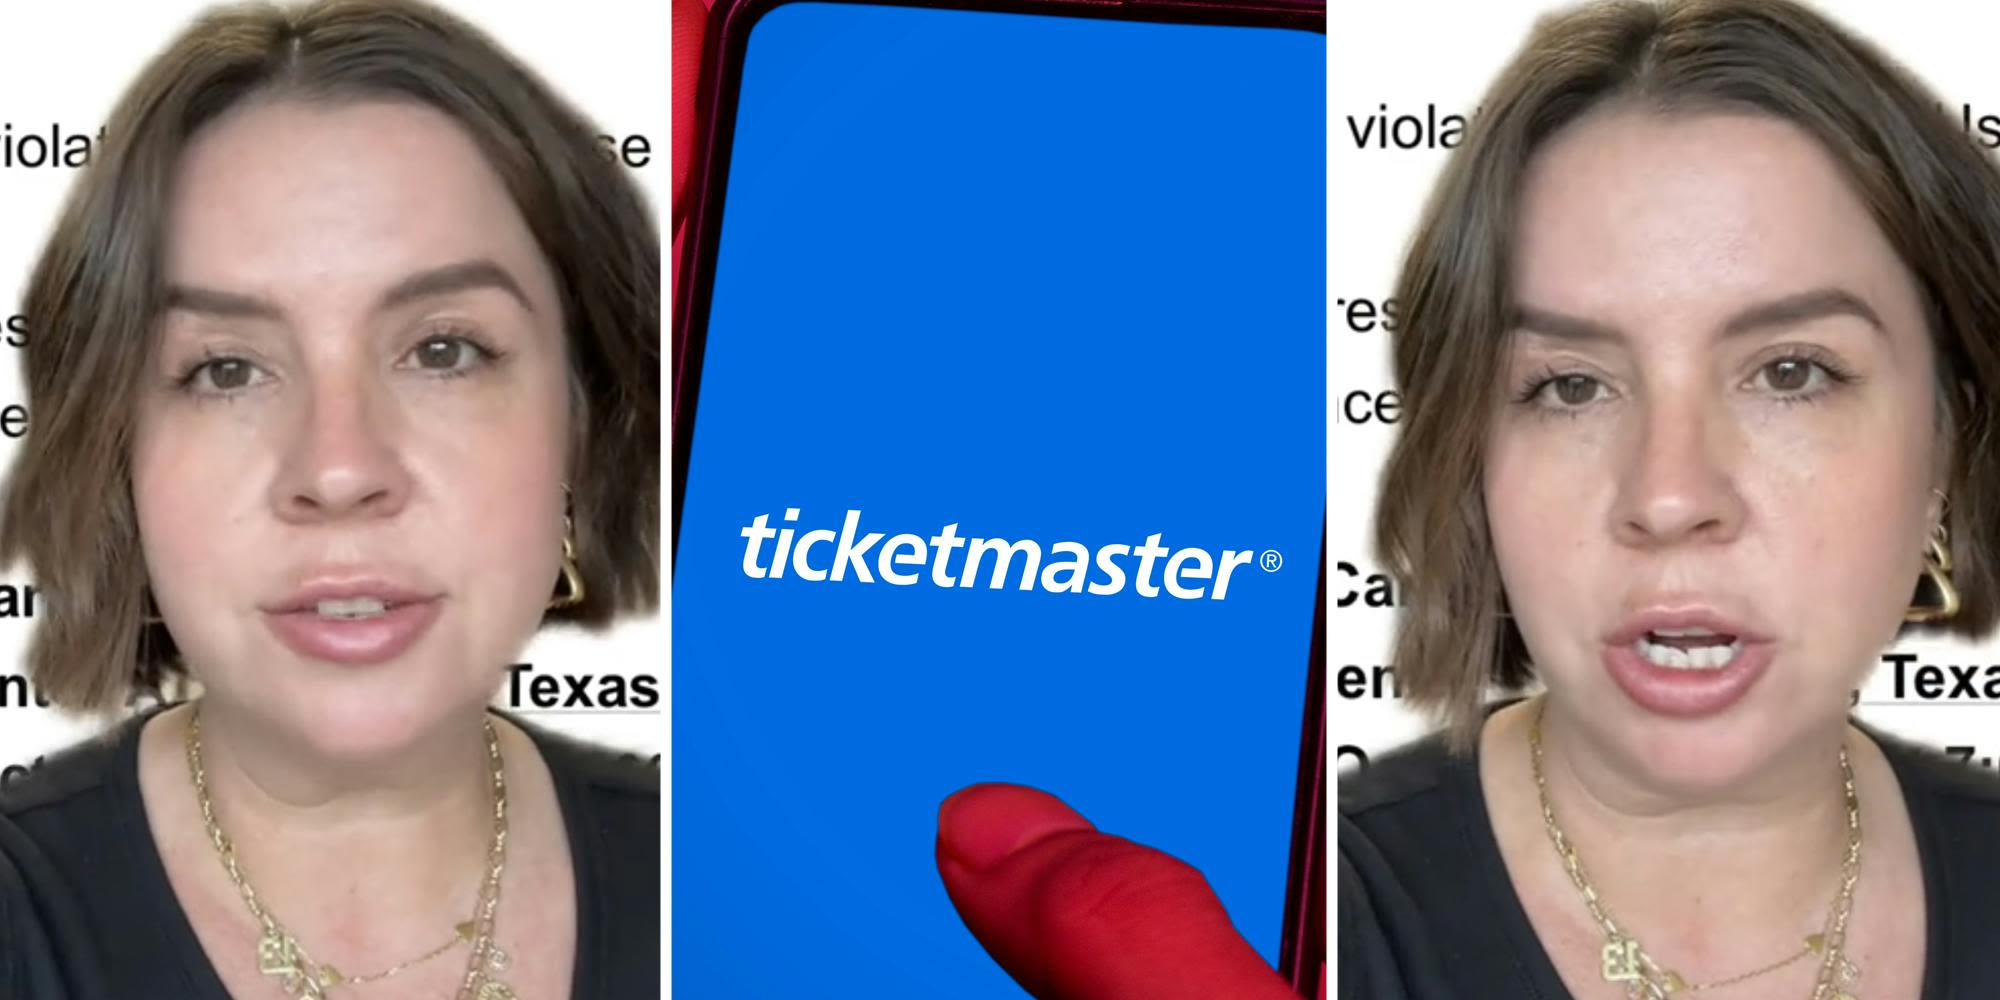 ‘They have no explanation’: Woman says Ticketmaster canceled her Sabrina Carpenter tickets. Then she found the exact seats for sale online